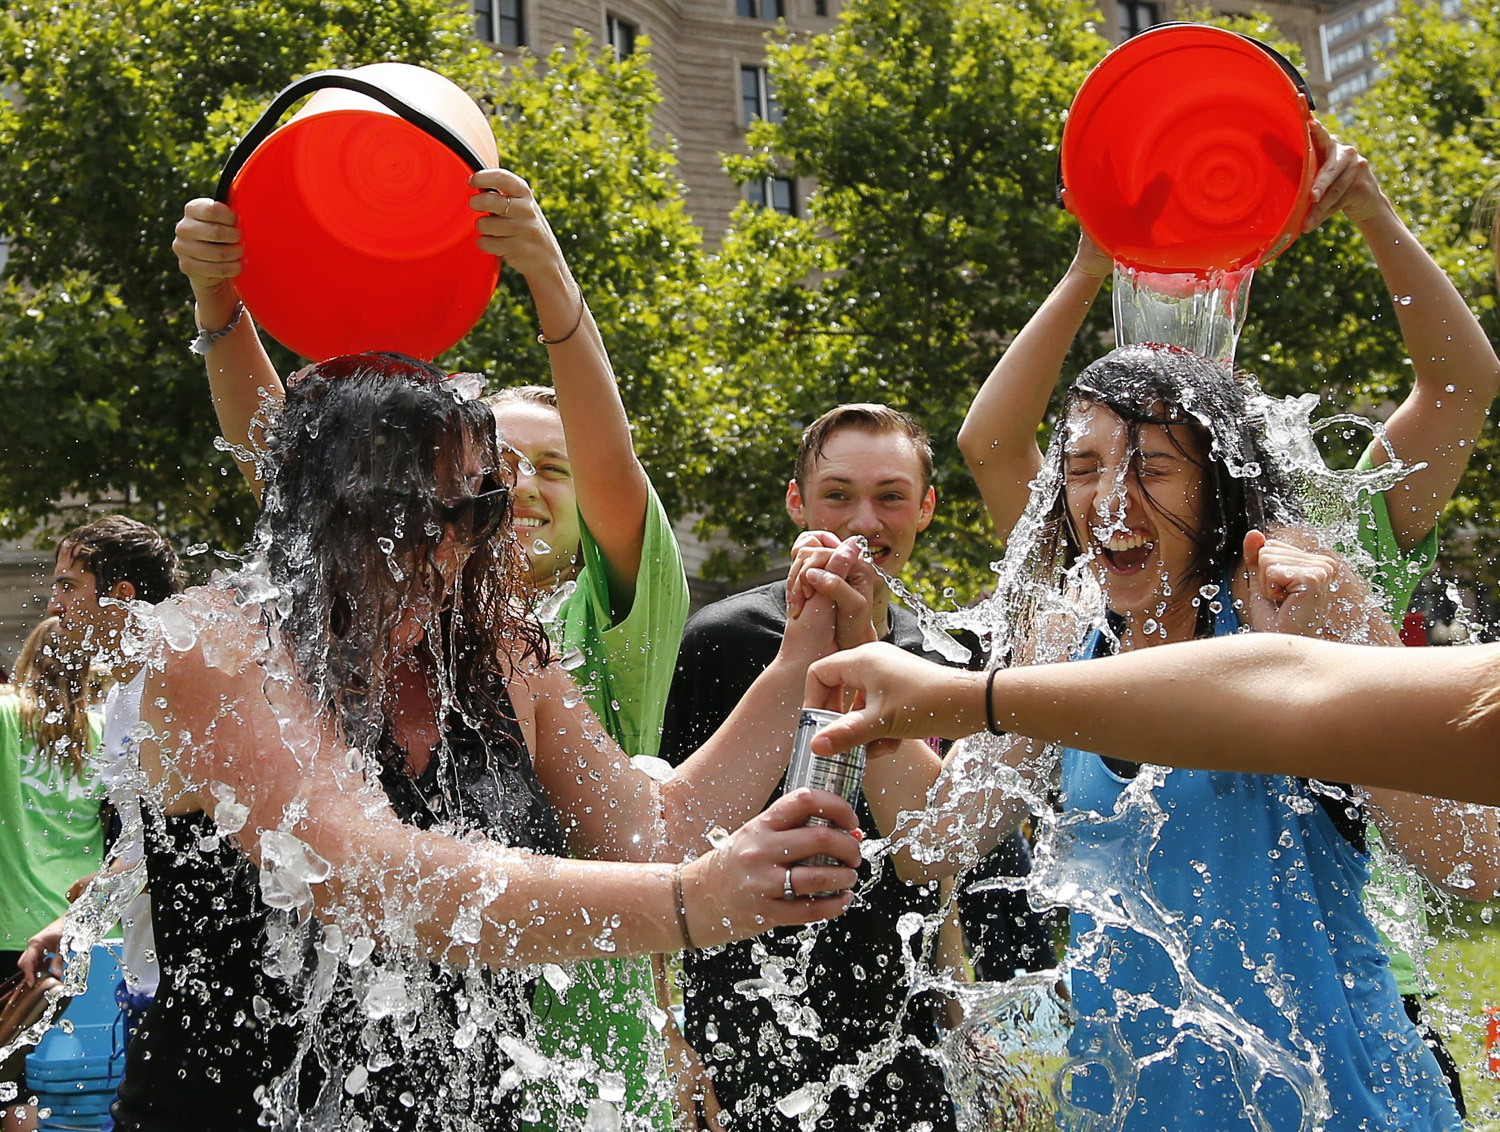 Two women get doused during the ice bucket challenge at Boston's Copley Square on Aug. 7, 2014. (Elise Amendola—AP)